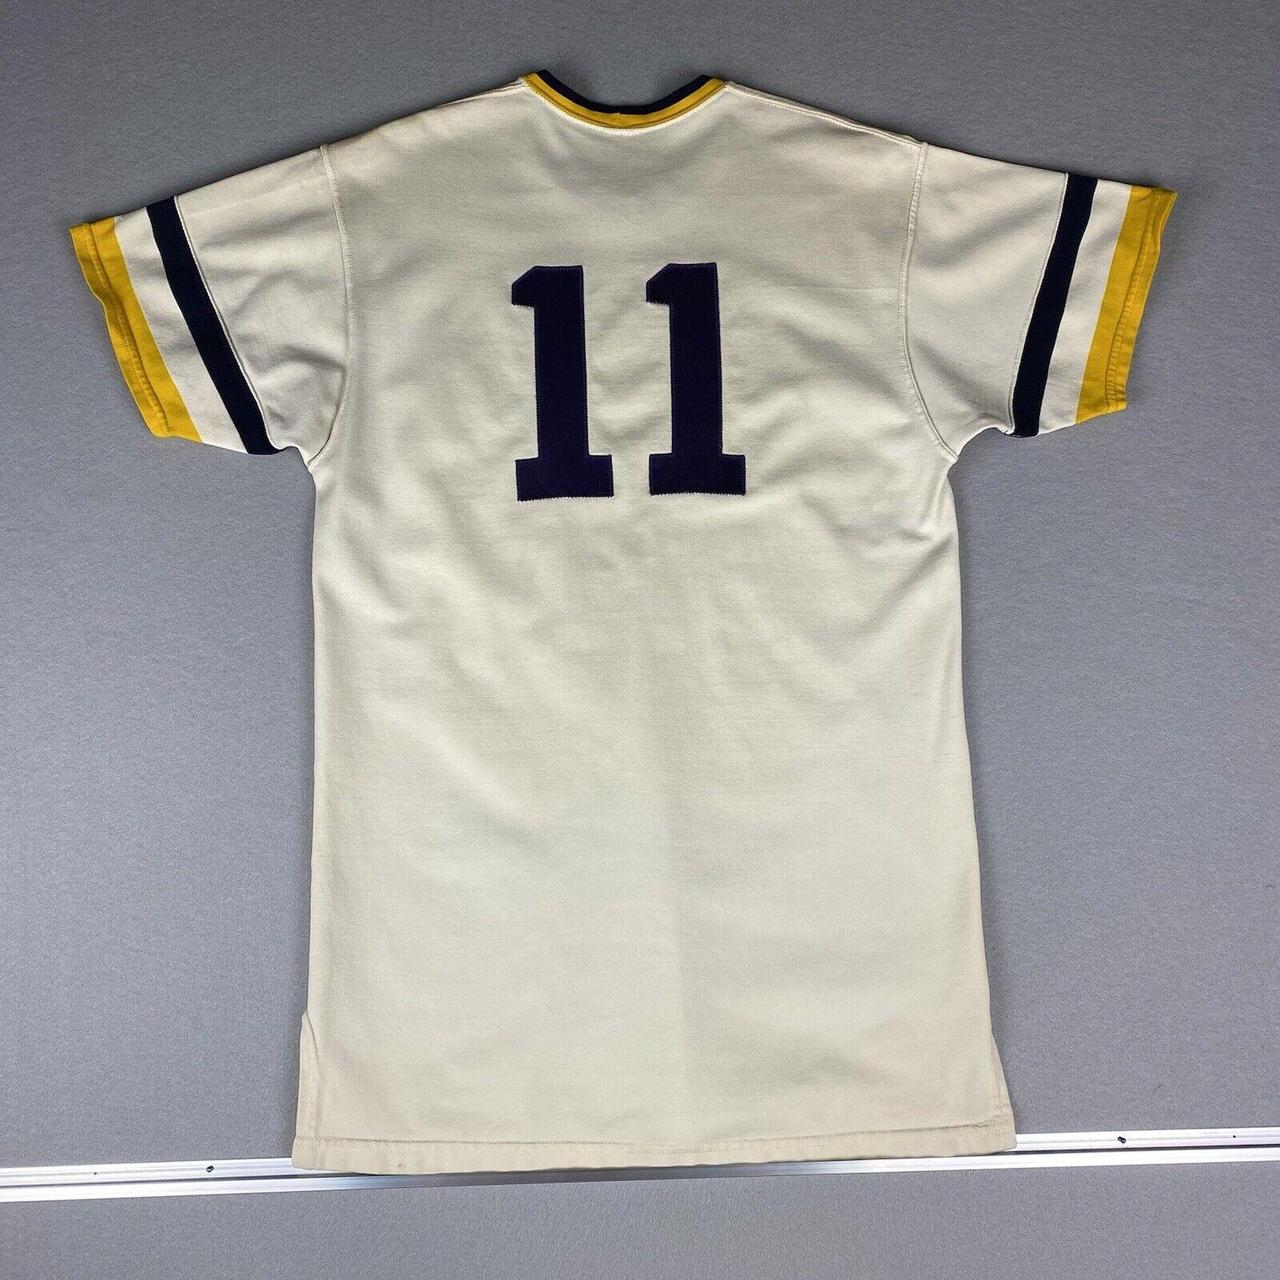 Product Image 2 - Vintage Milford Post #34 Jersey